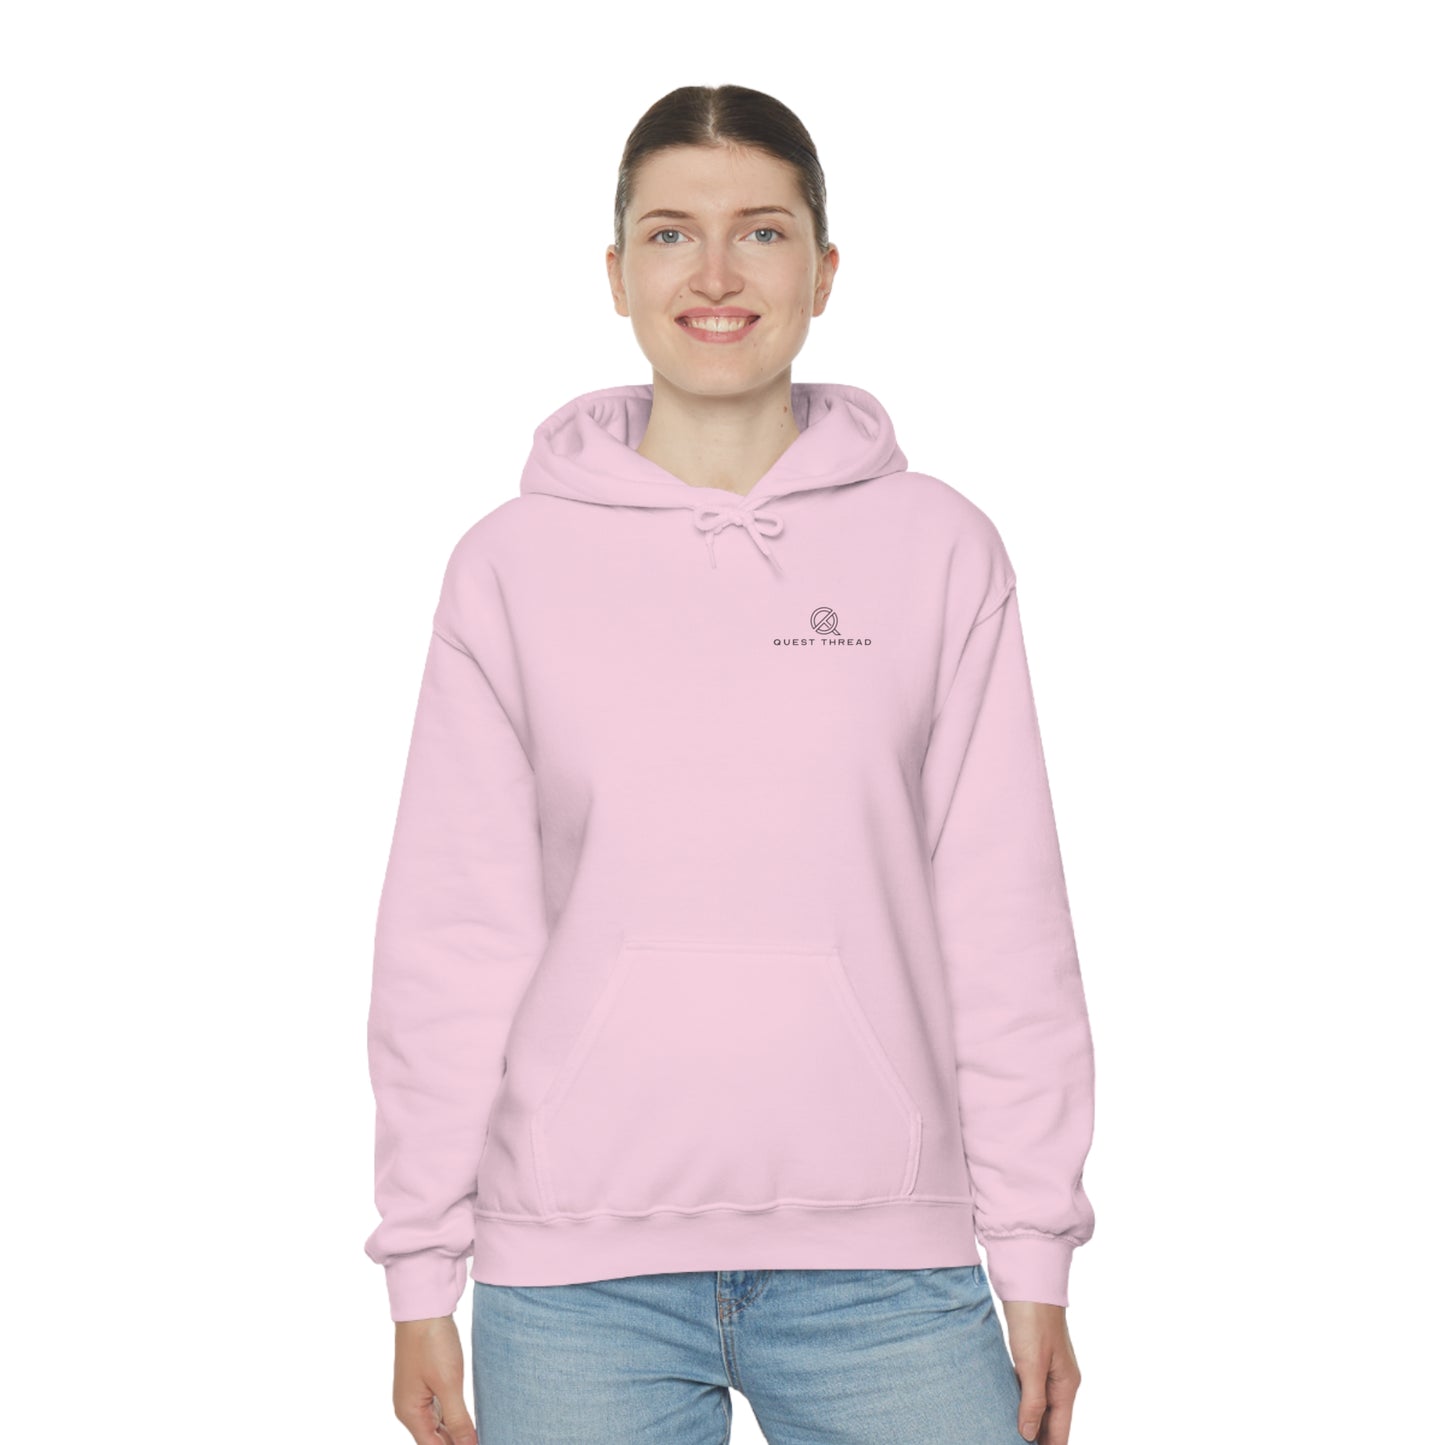 light-pink-quest-thread-hoodie-with-small-logo-on-left-chest